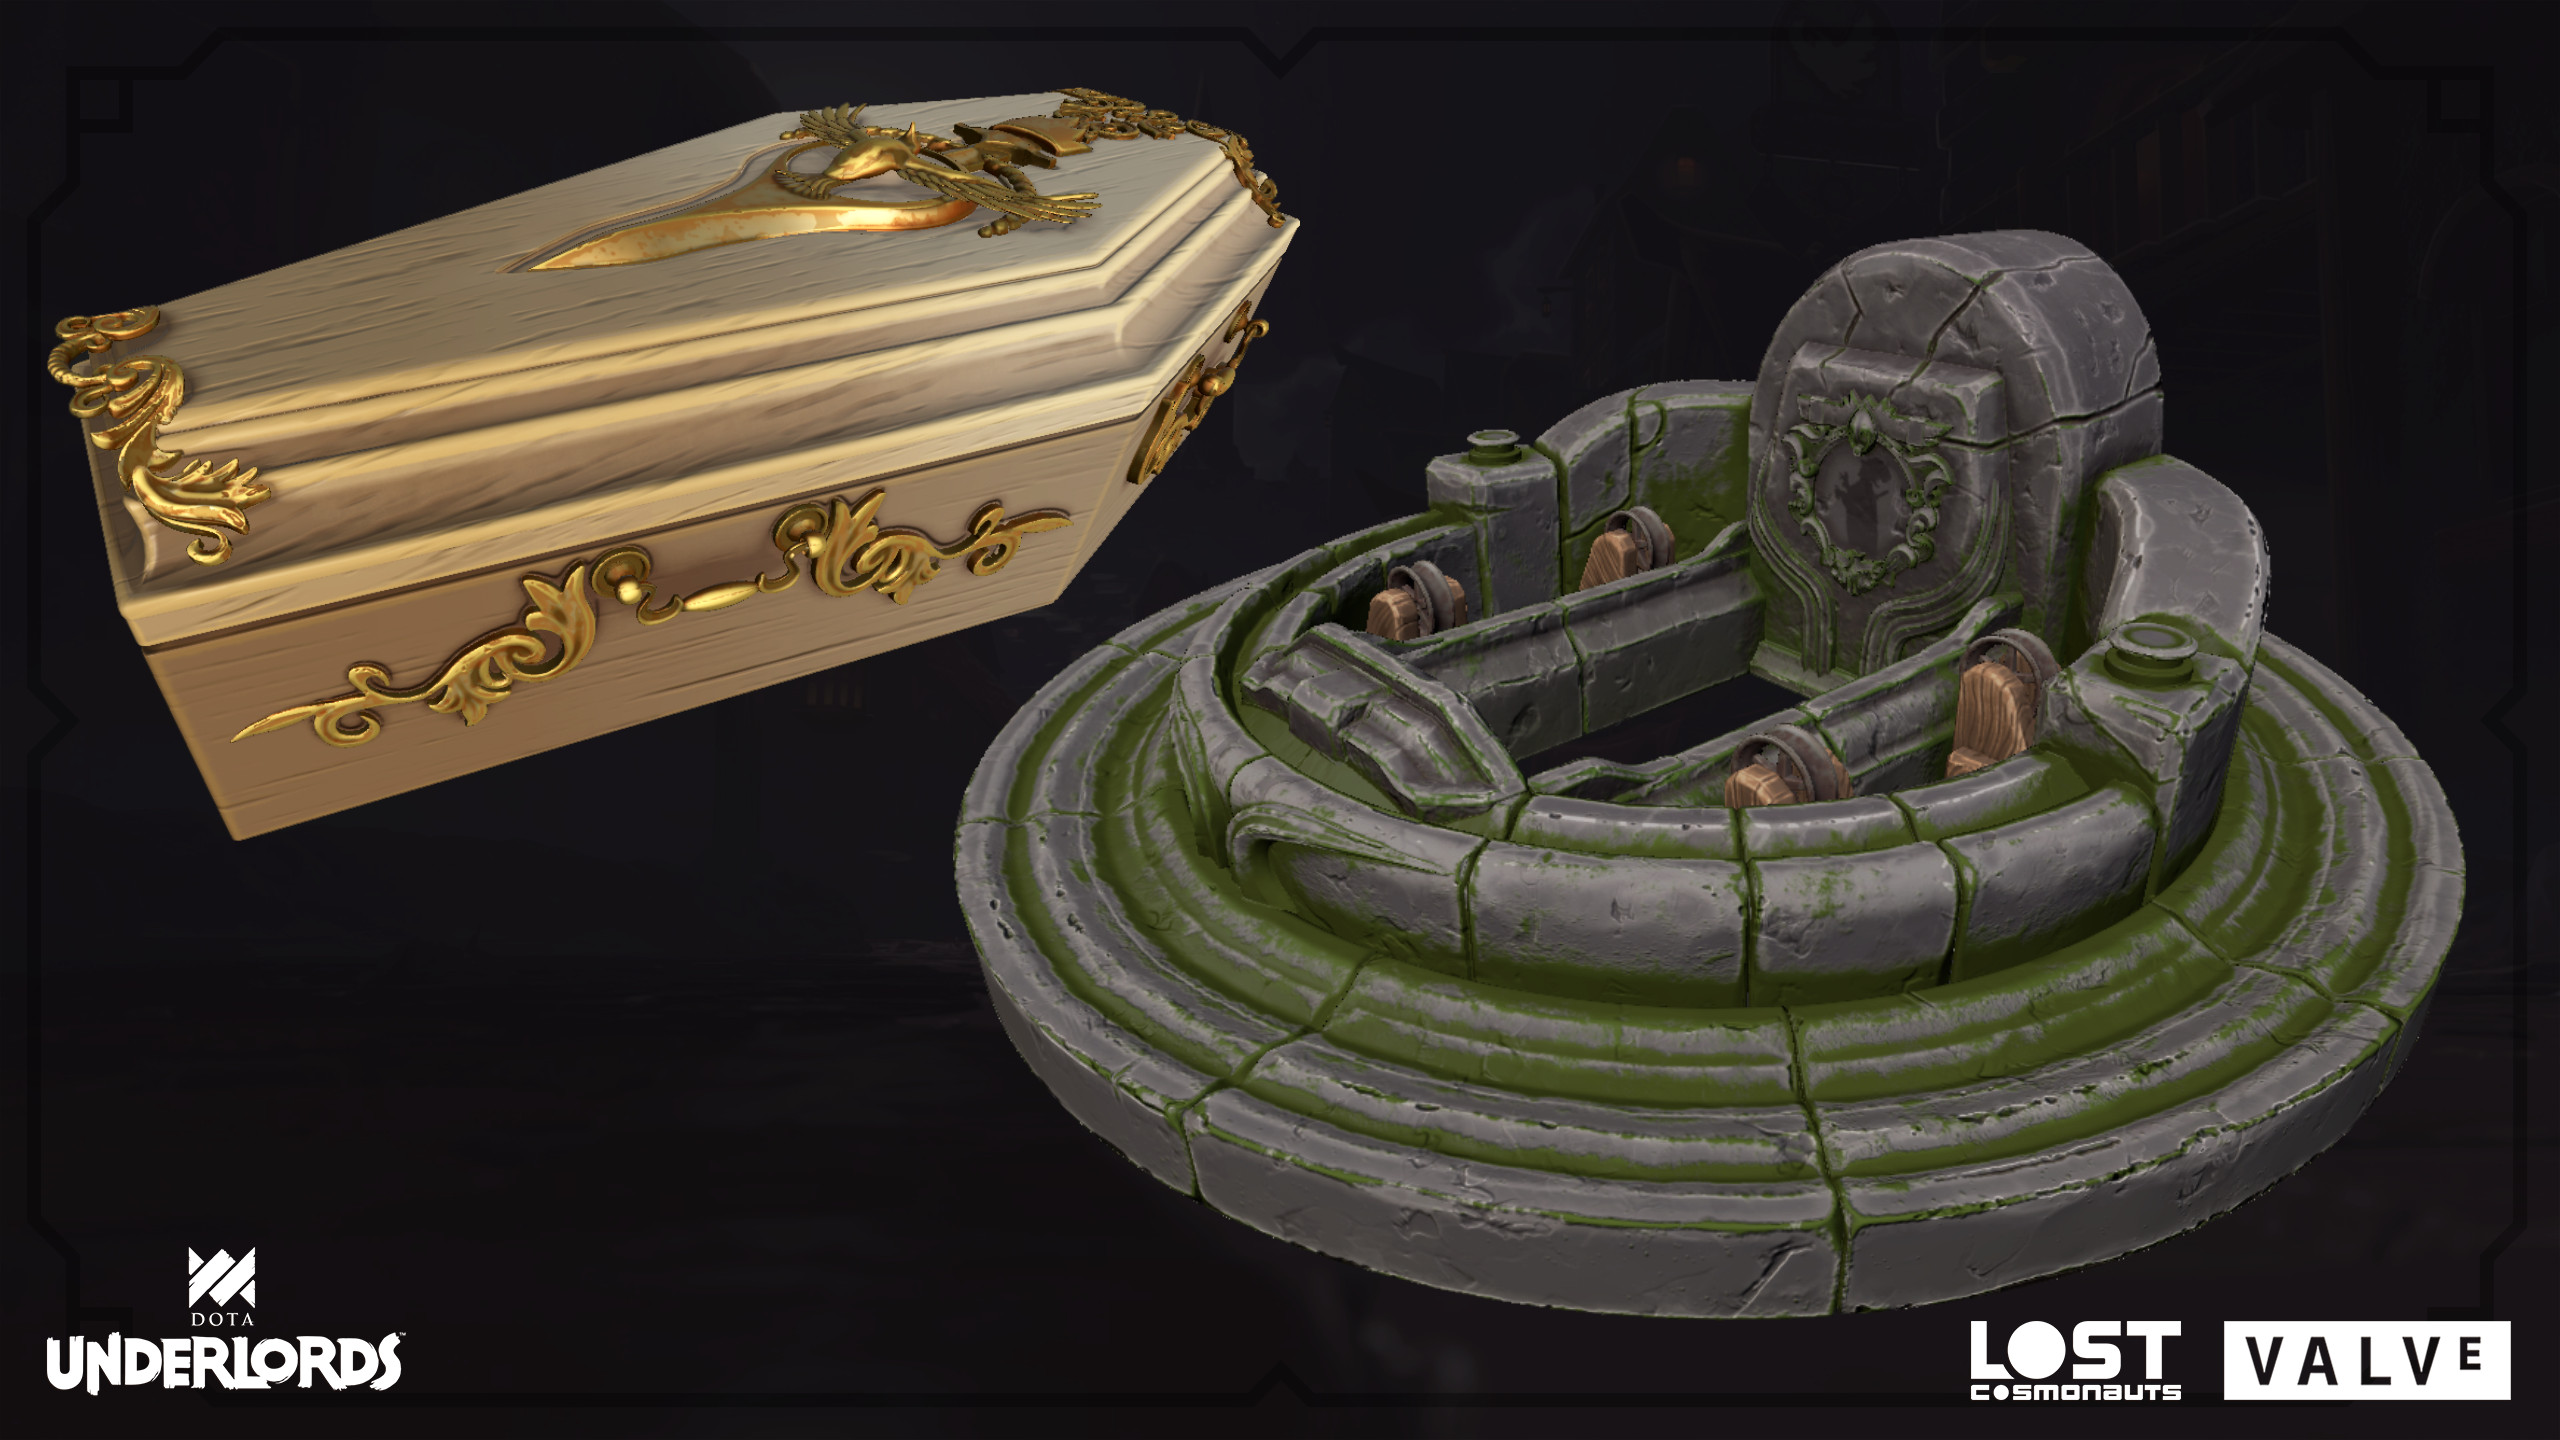 Eeb's Grave and Casket
Designs by Alfred Khamidullin.
Modeling and Sculpting by Denis Varchulik and Tarantine Gomes.
Texturing by Me and Denis Varchulik.